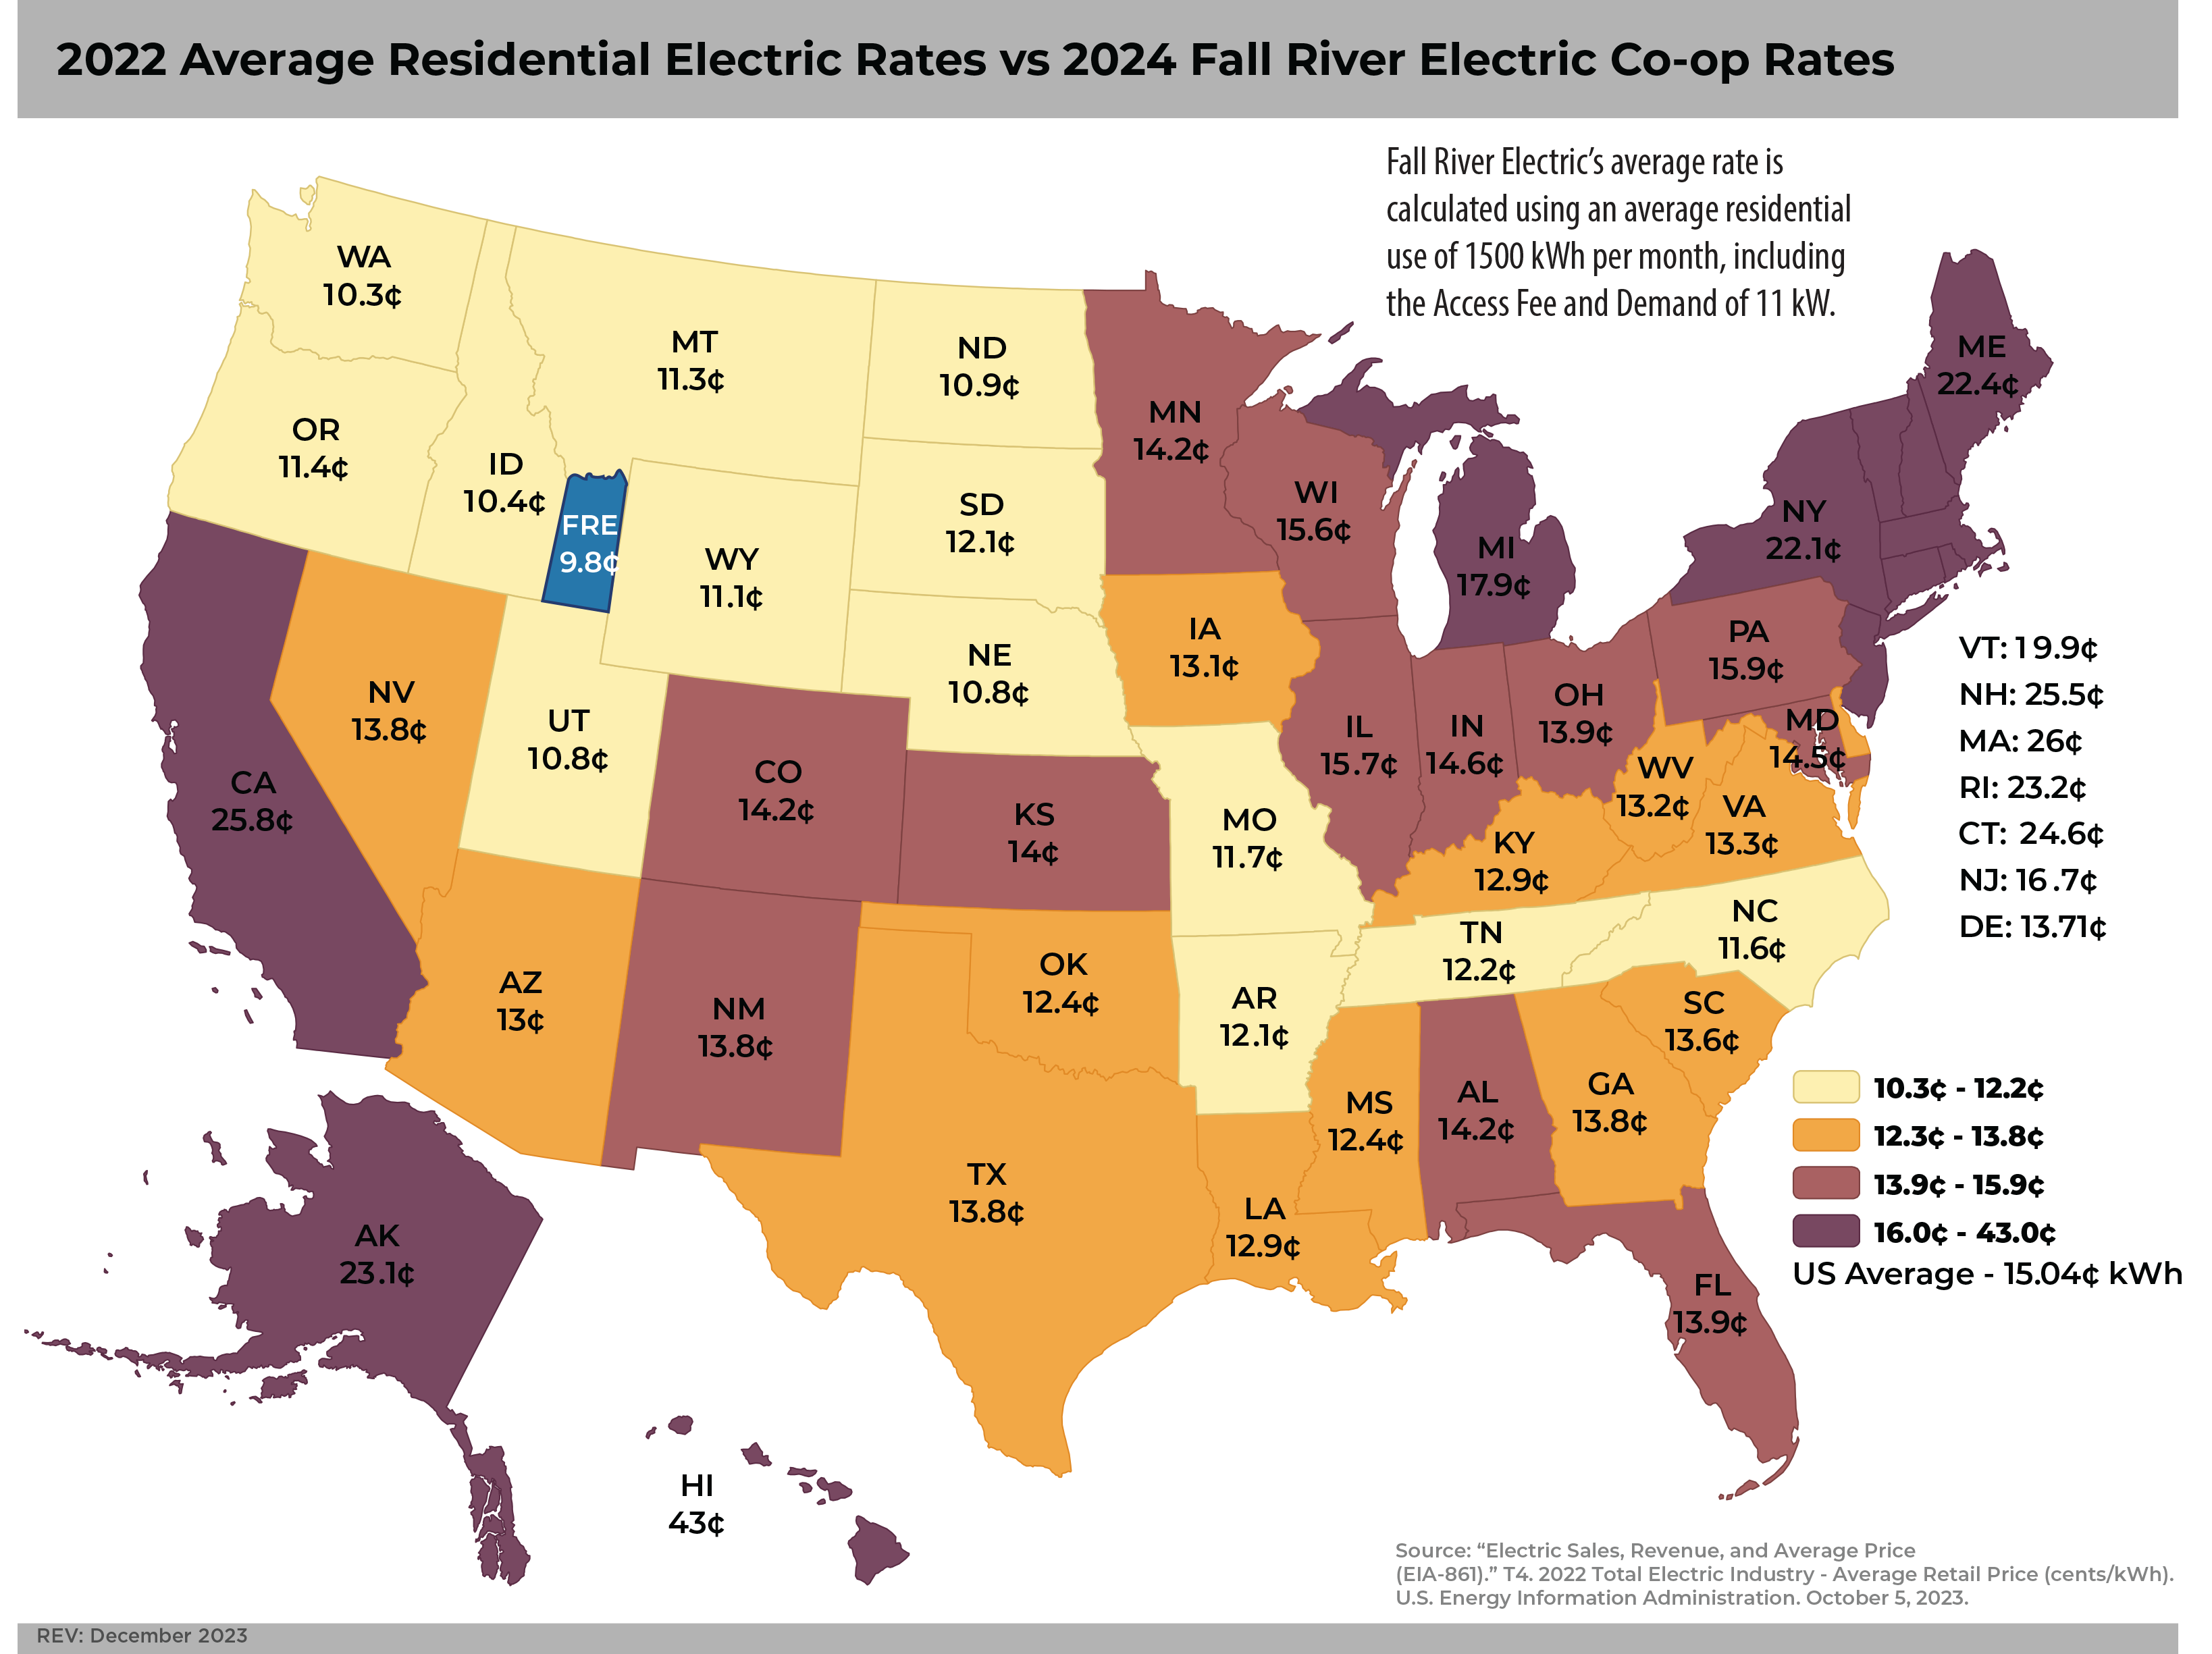 2024 FALL RIVER ELECTRIC RATES COMPARED TO 2022 NATIONAL RATES